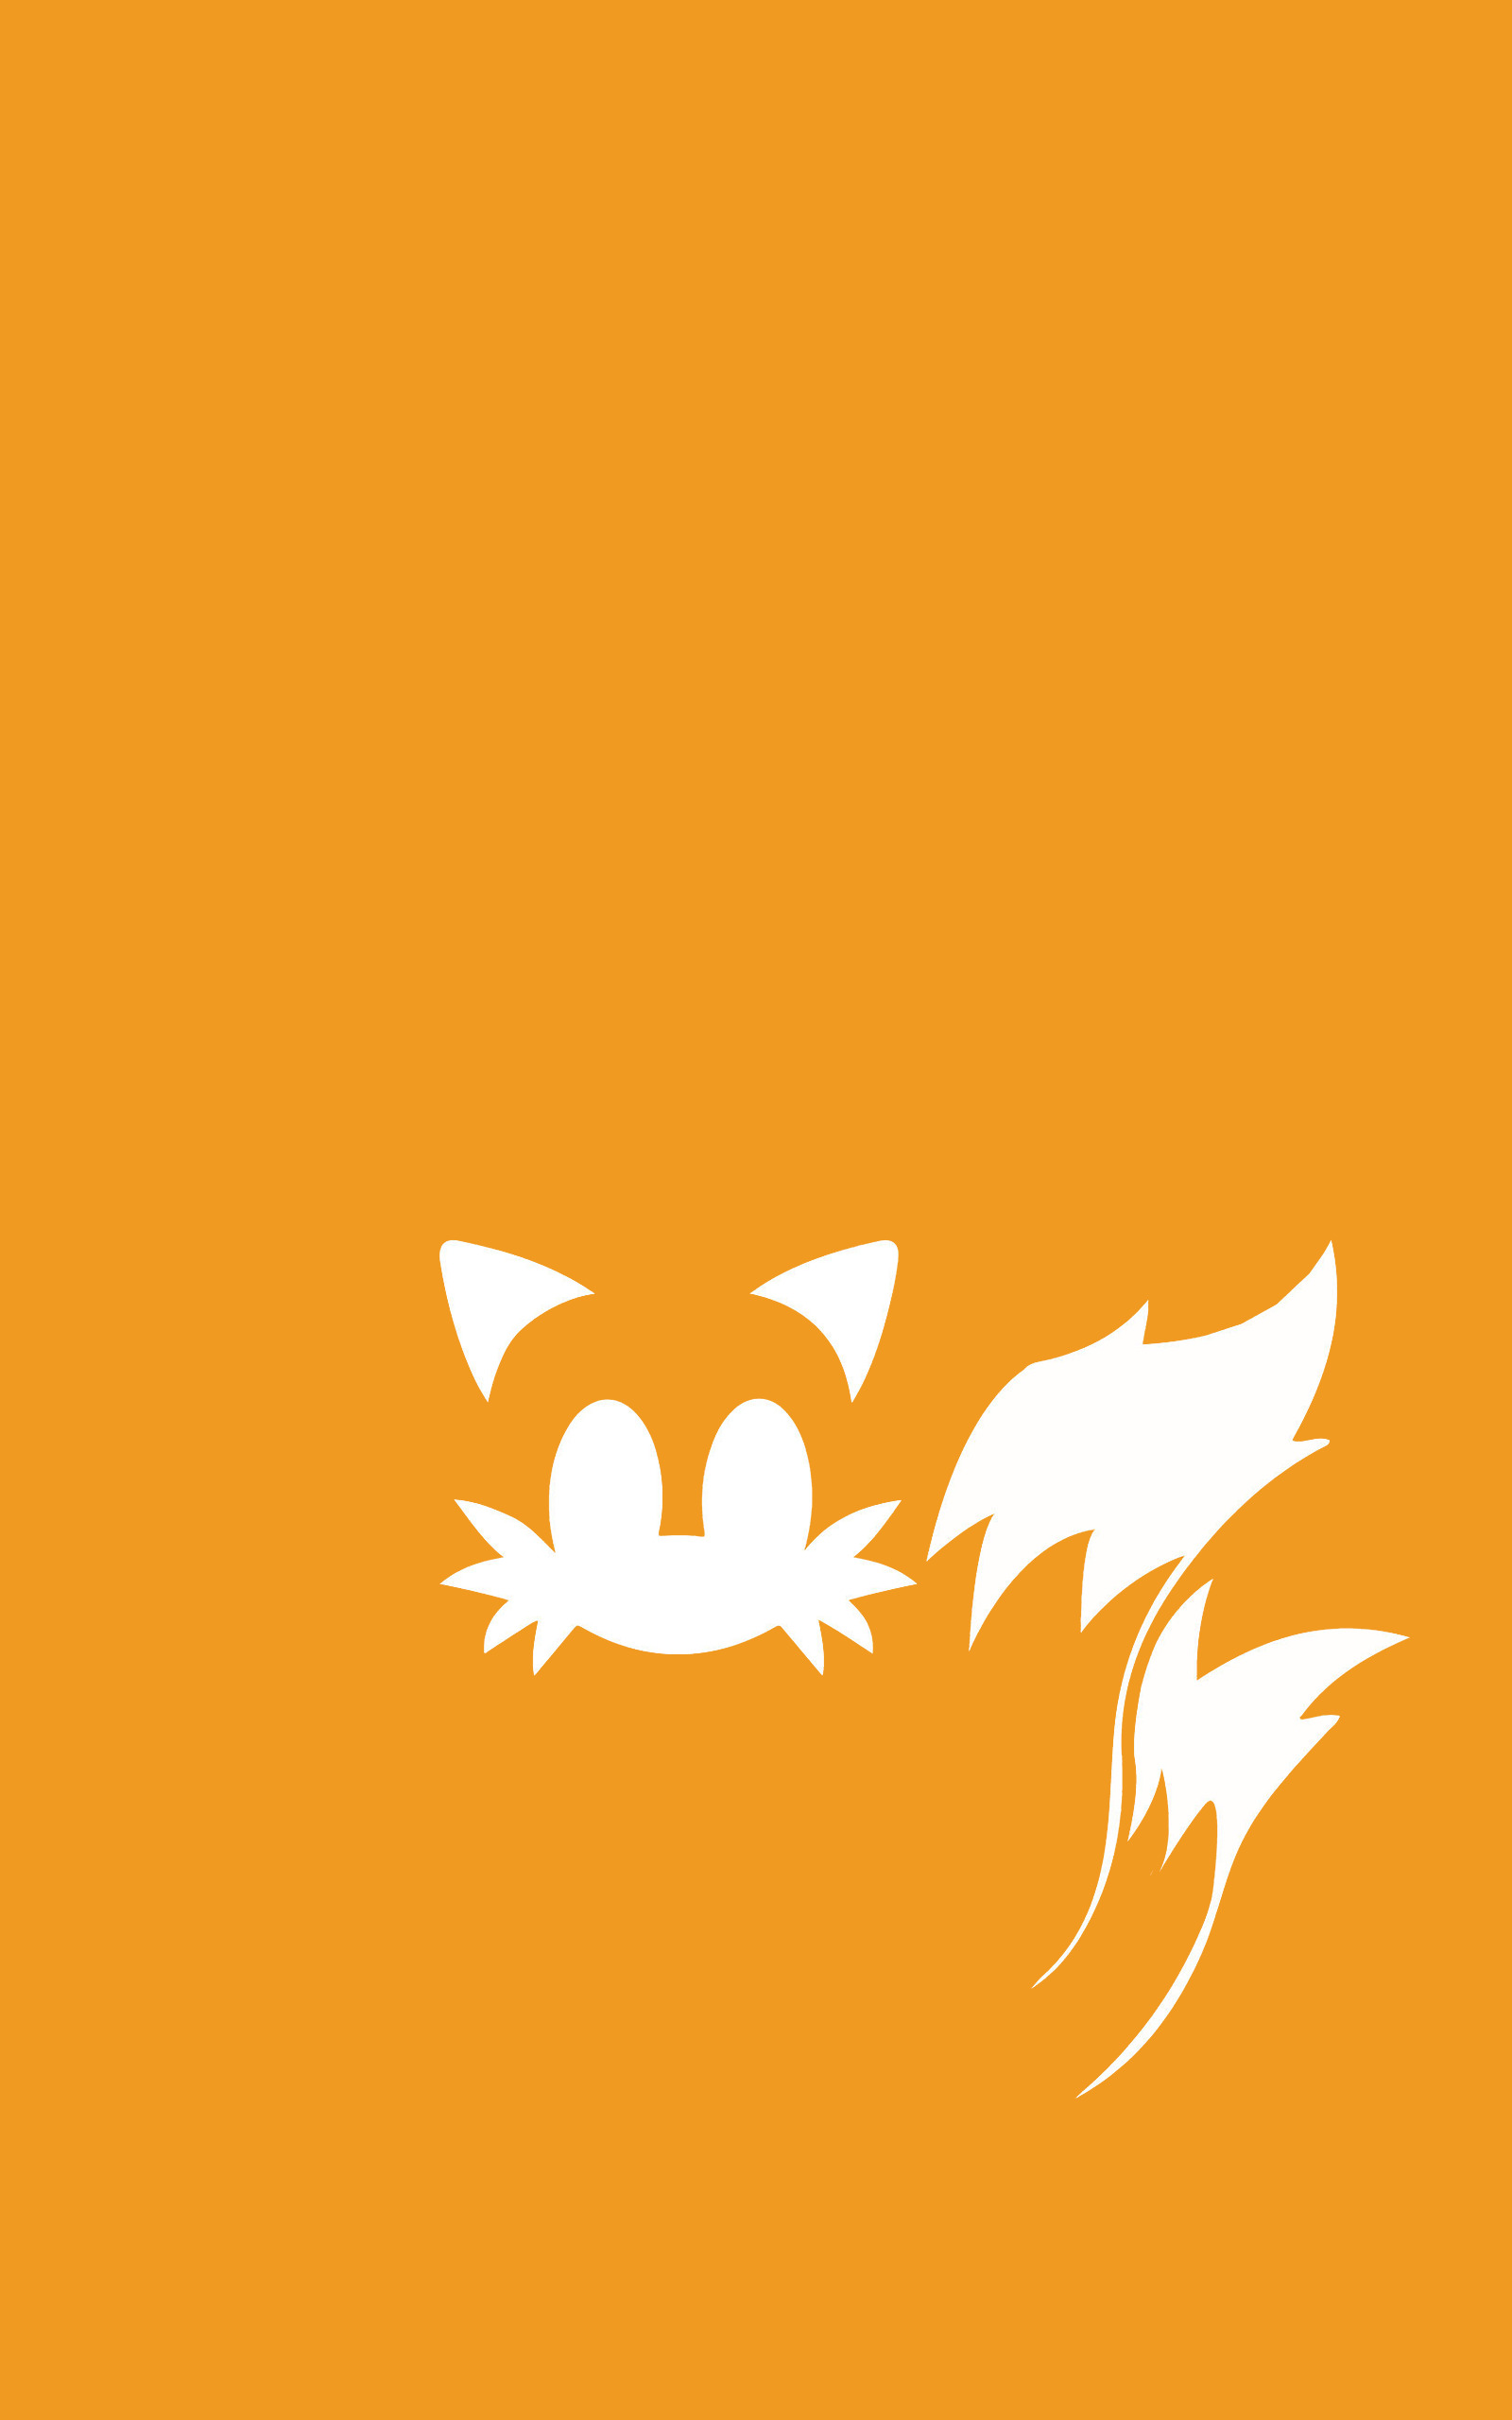 Tails (character), Minimalism, Portrait Display, Sonic The Hedgehog, Video Games Wallpaper